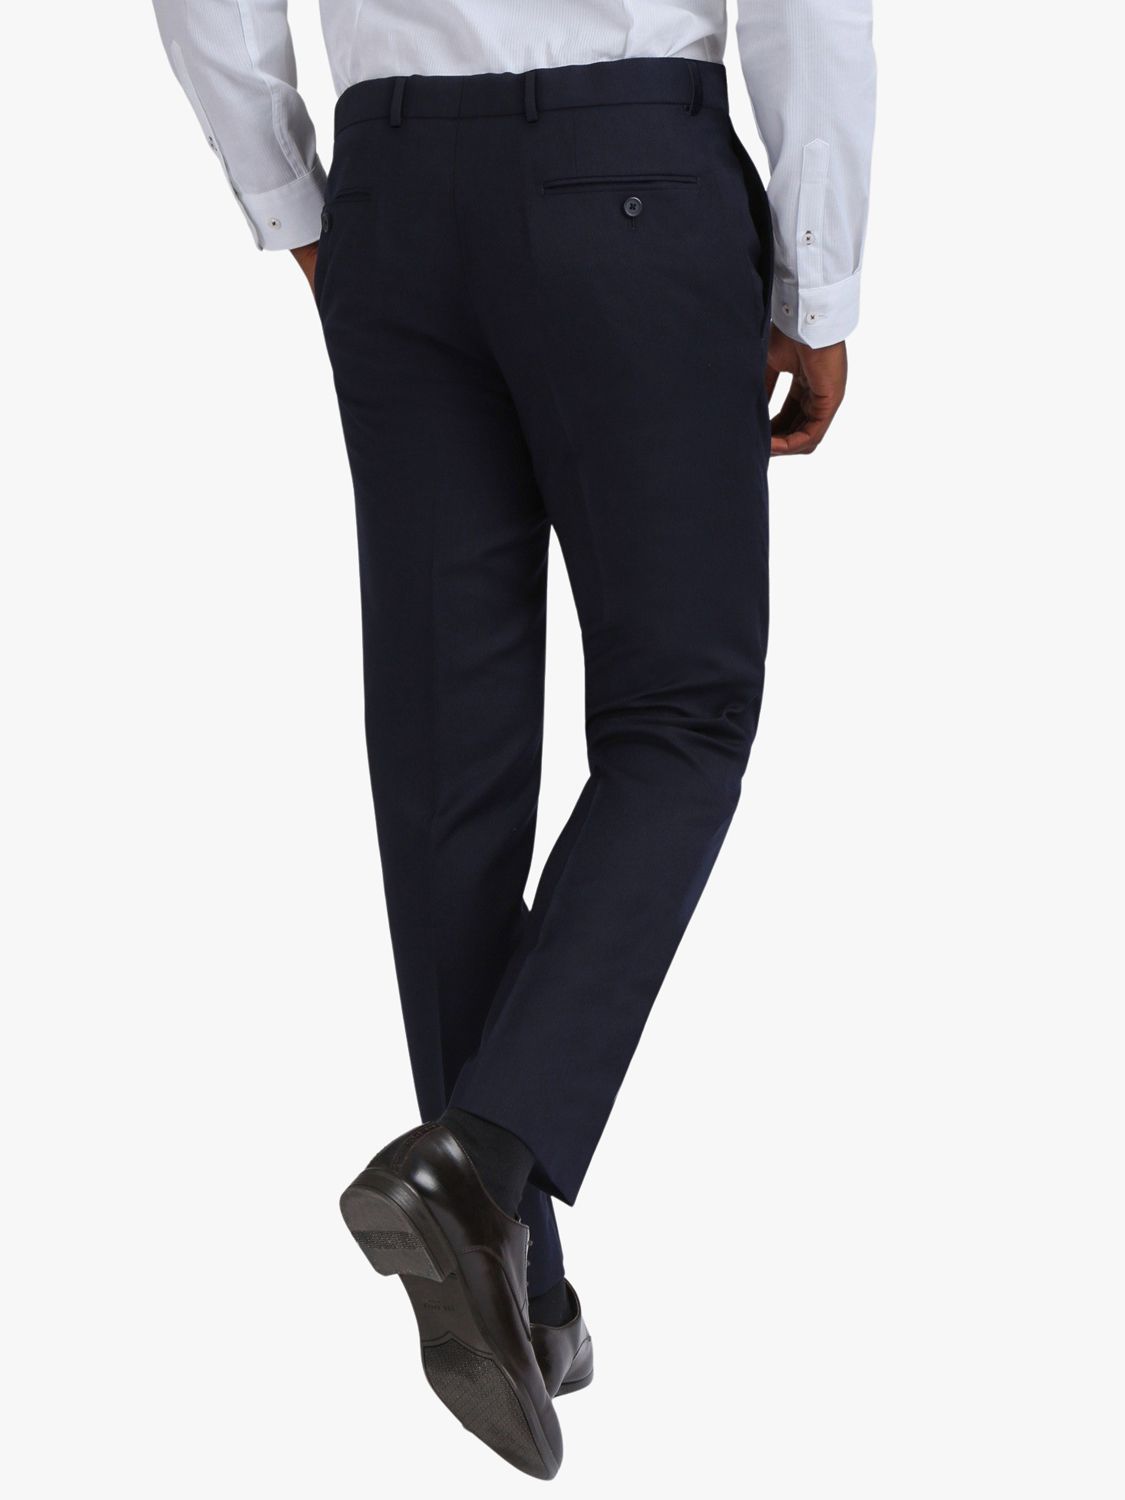 Ted Baker Brook Tuxedo Slim Fit Trousers, Navy, 38R